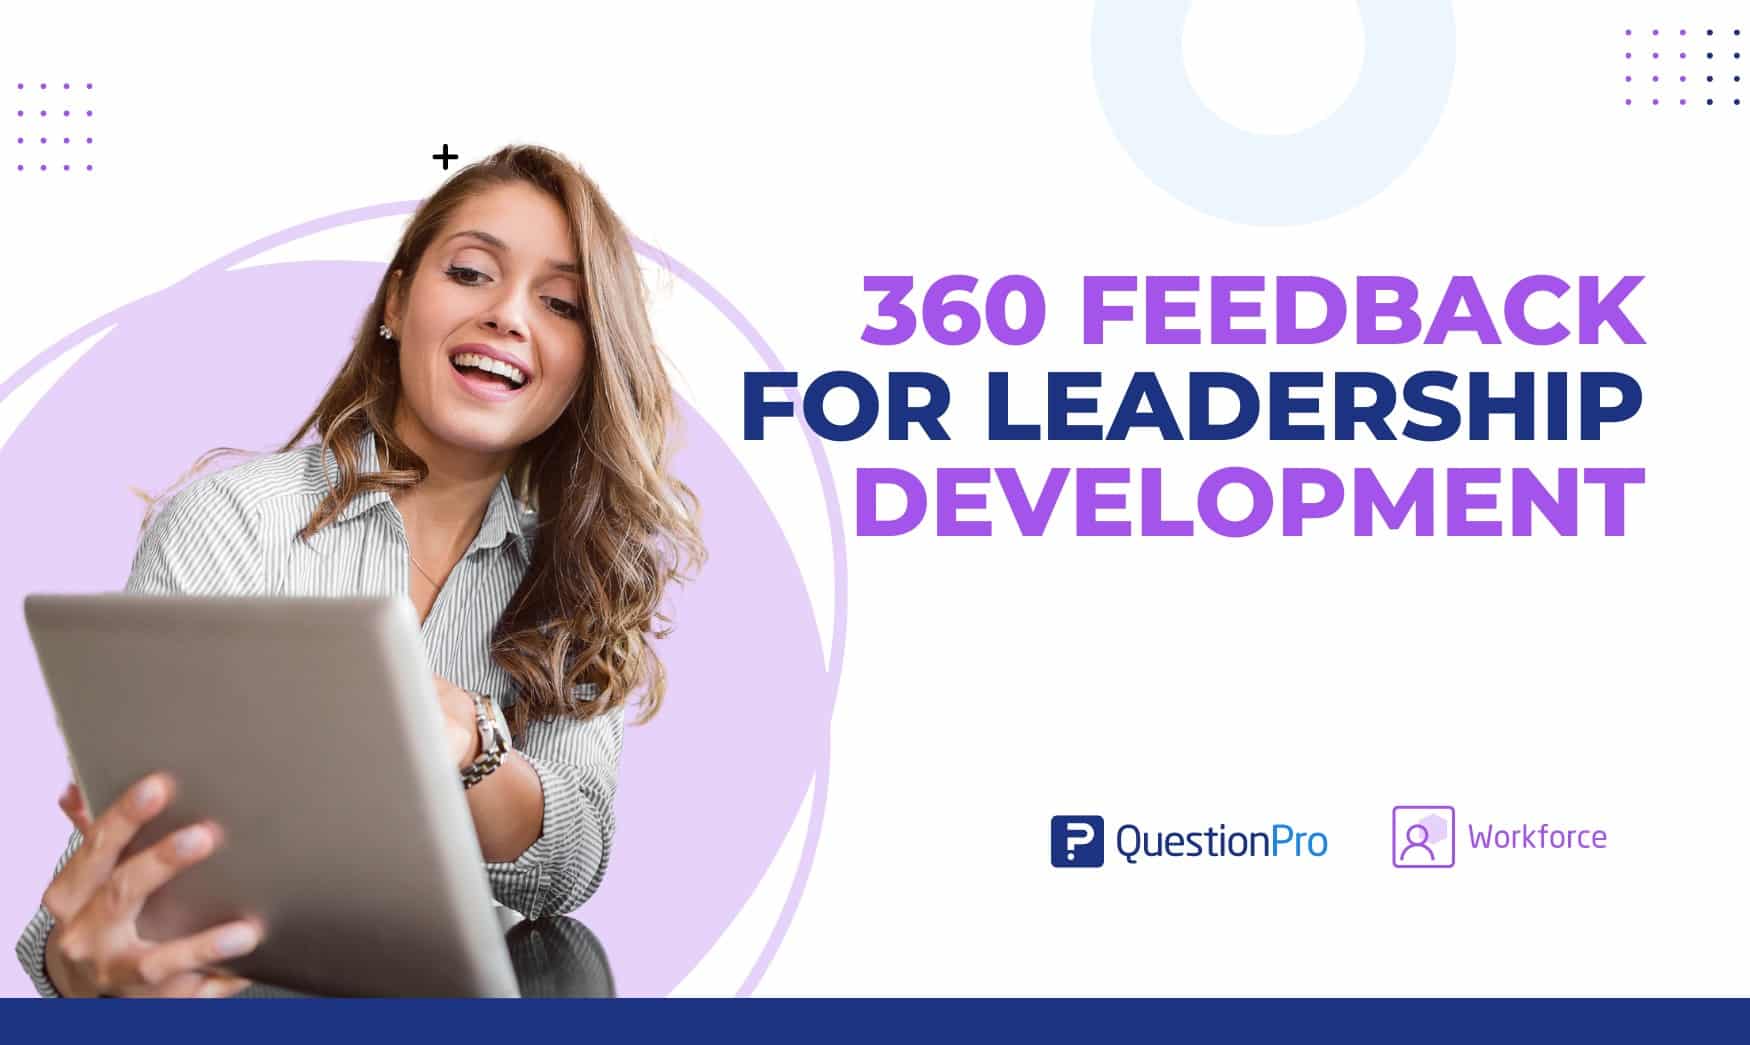 Lear how to use 360 Feedback for Leadership Development to improve your workforce strategy like never before. Learn more here.